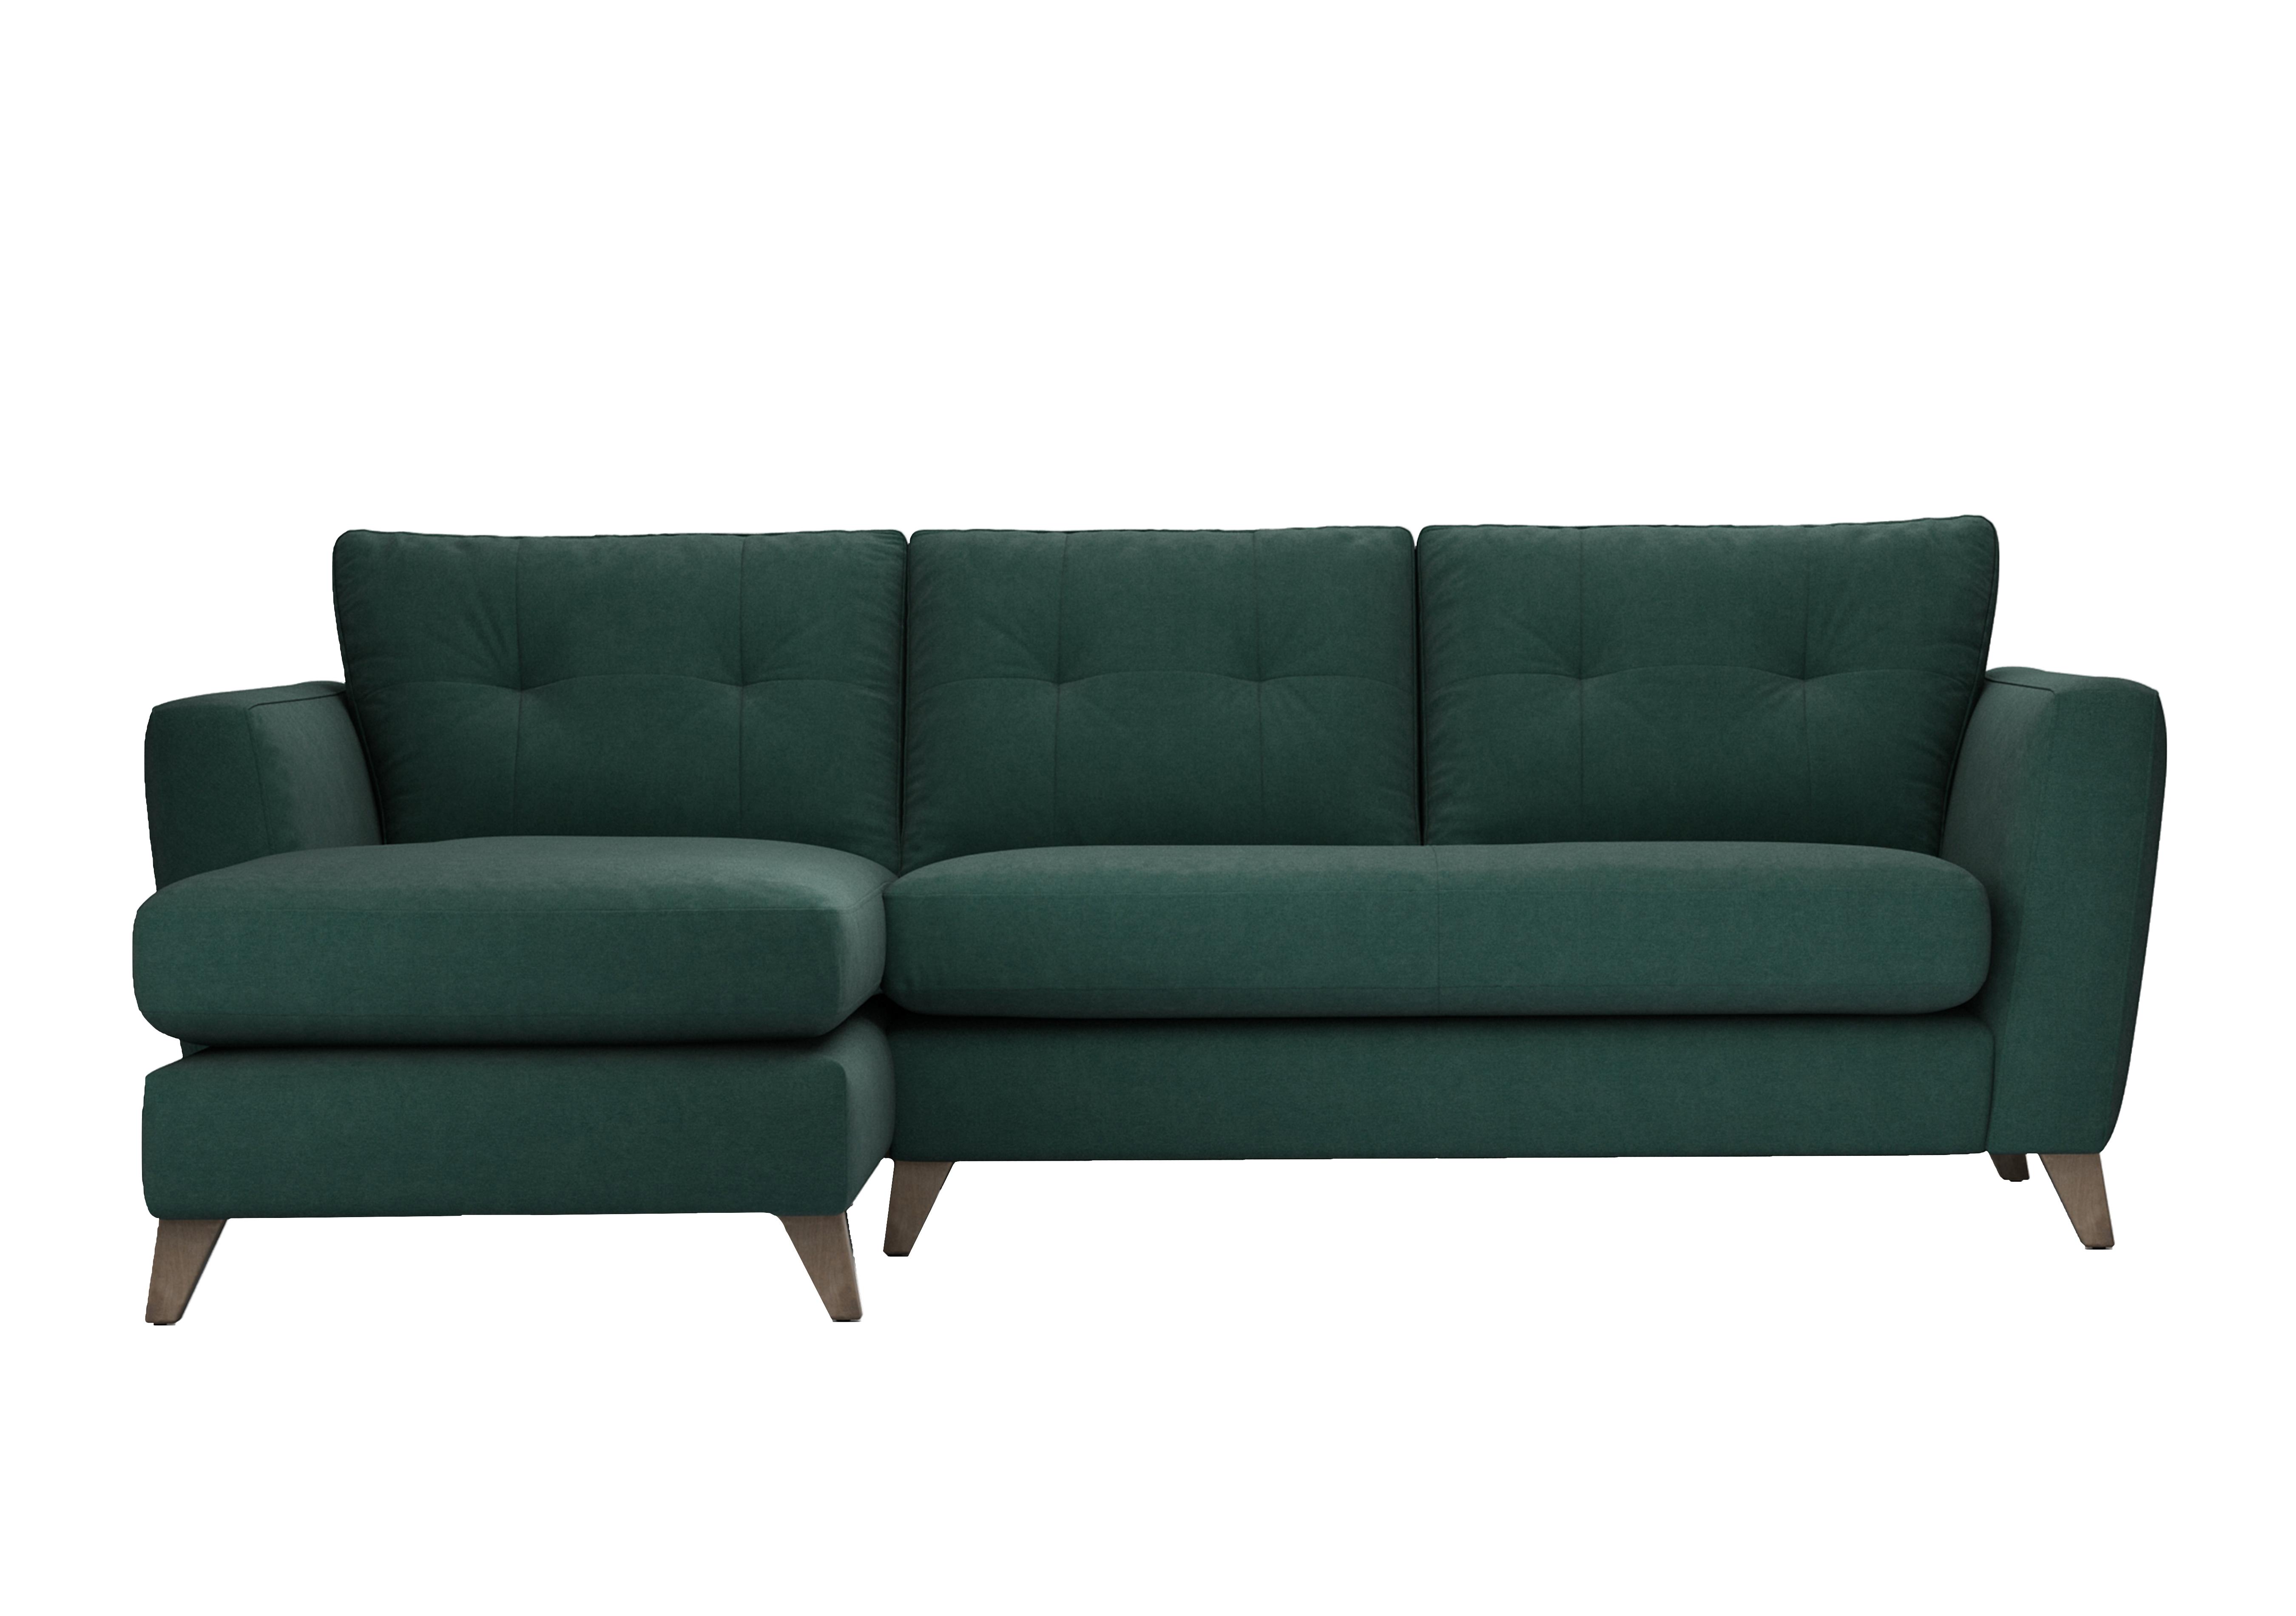 Hermione Fabric Corner Sofa with Chaise End in Cur226 Curly Kale Wo Ft on Furniture Village